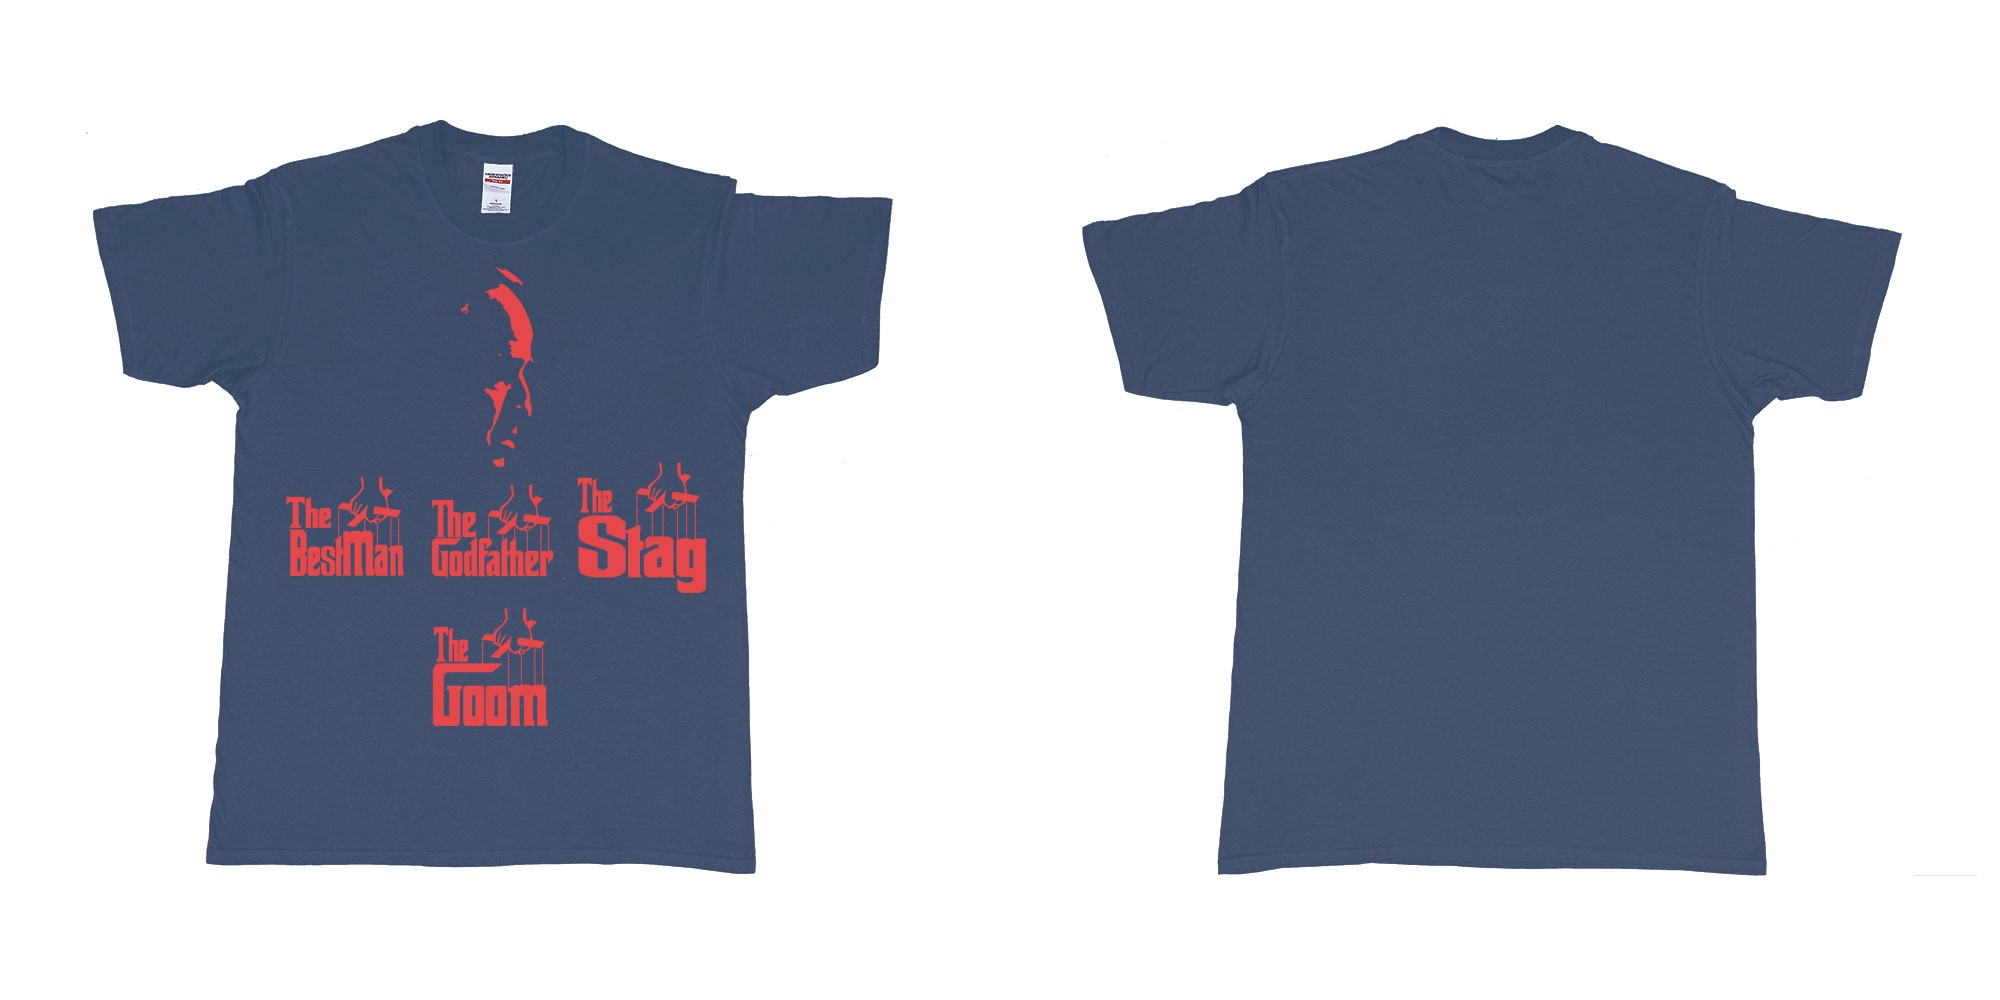 Custom tshirt design TPW the godfather in fabric color navy choice your own text made in Bali by The Pirate Way